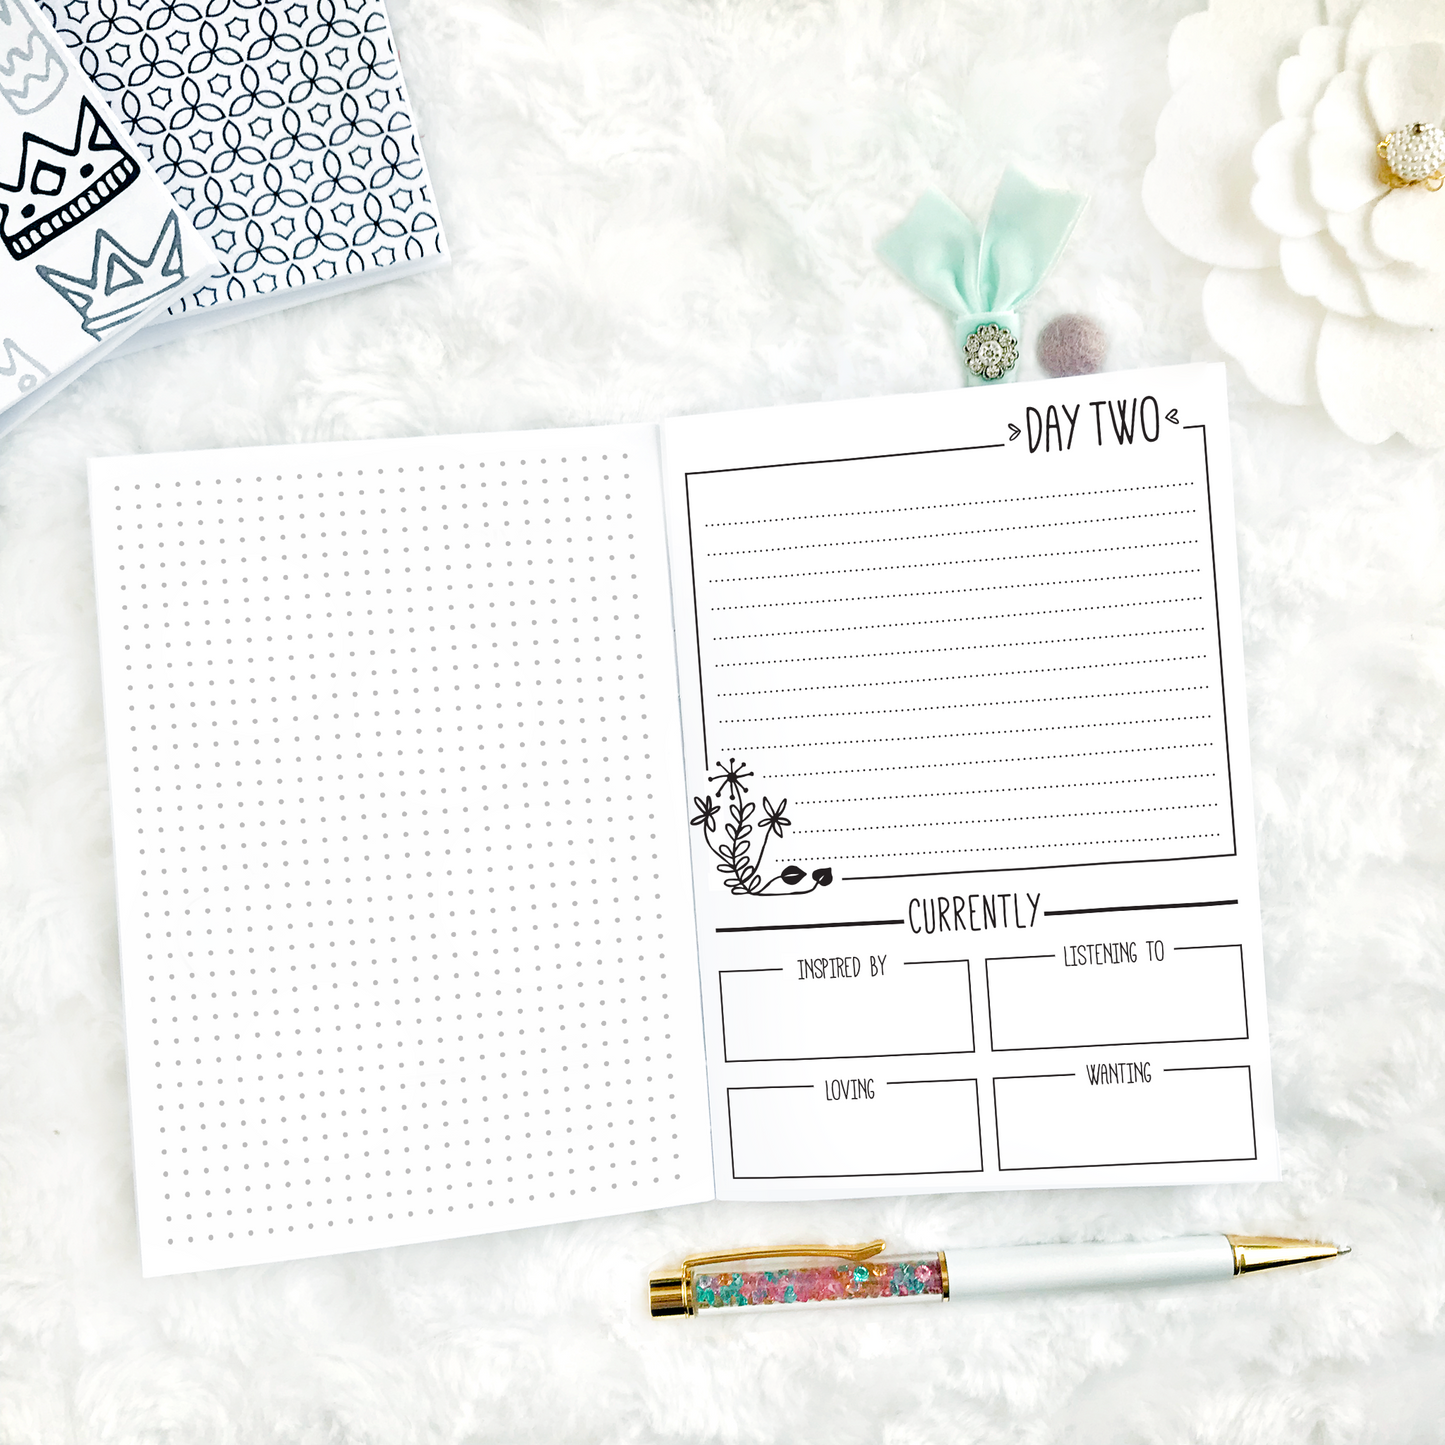 Conference Planner | Printed